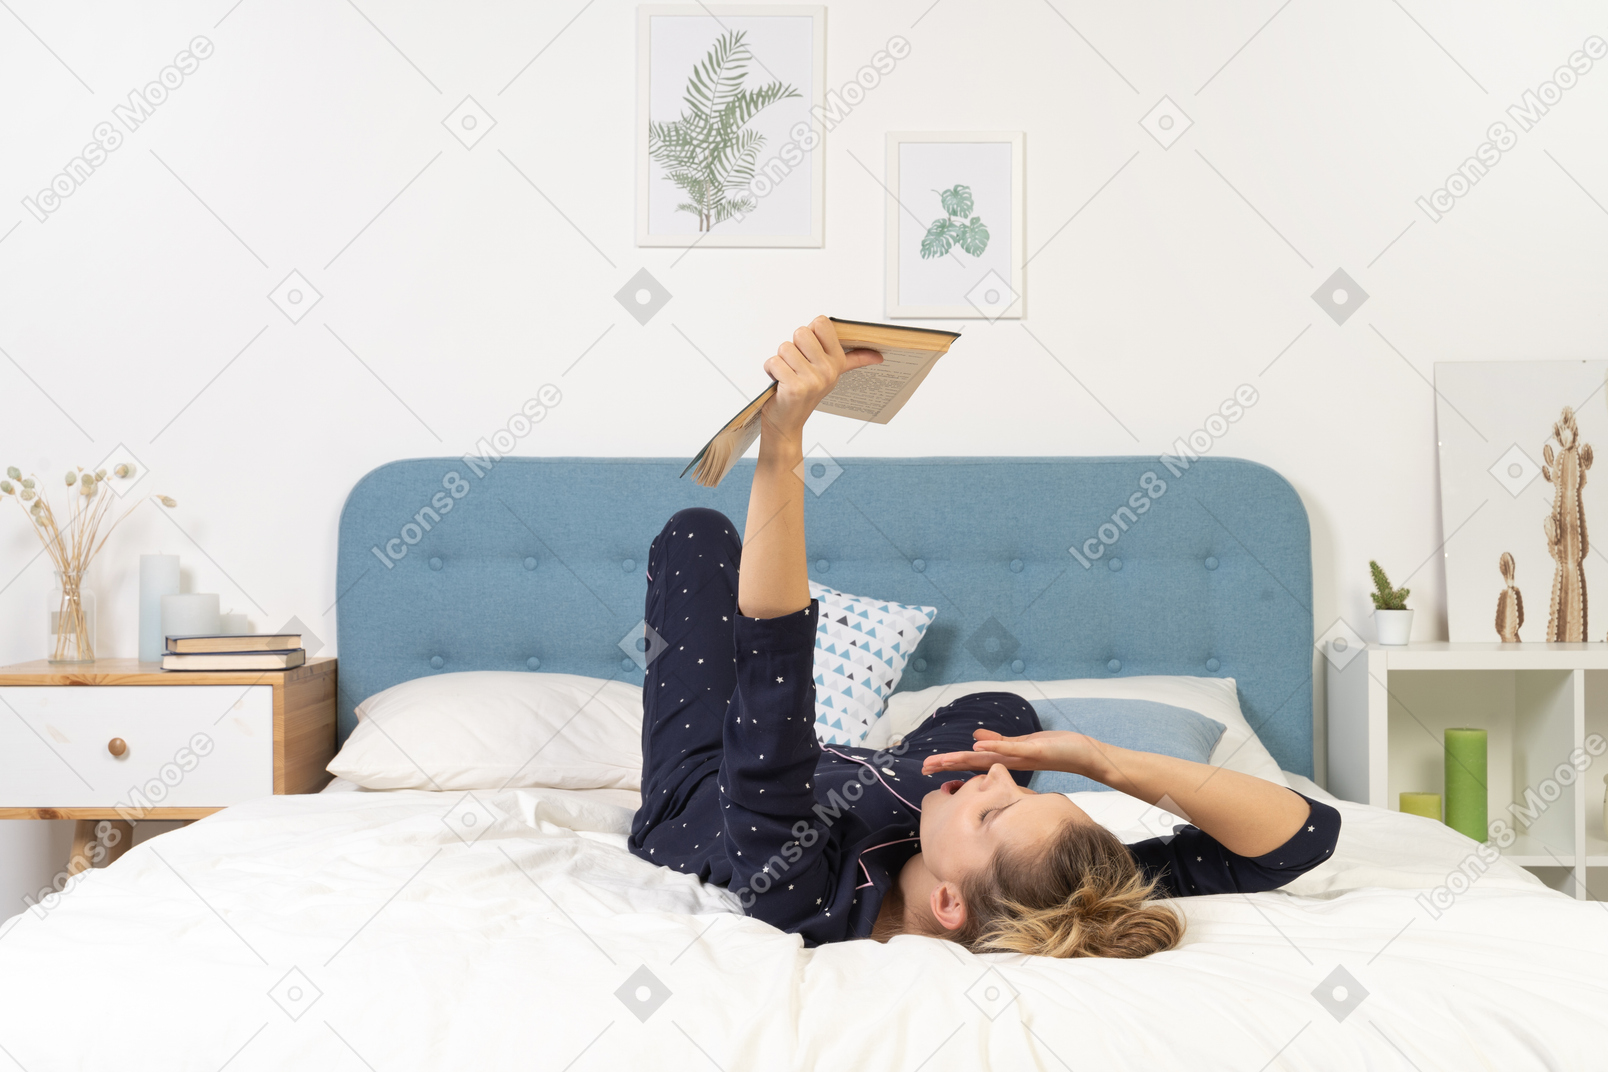 Full-length of a bored young lady trying to read book in bed